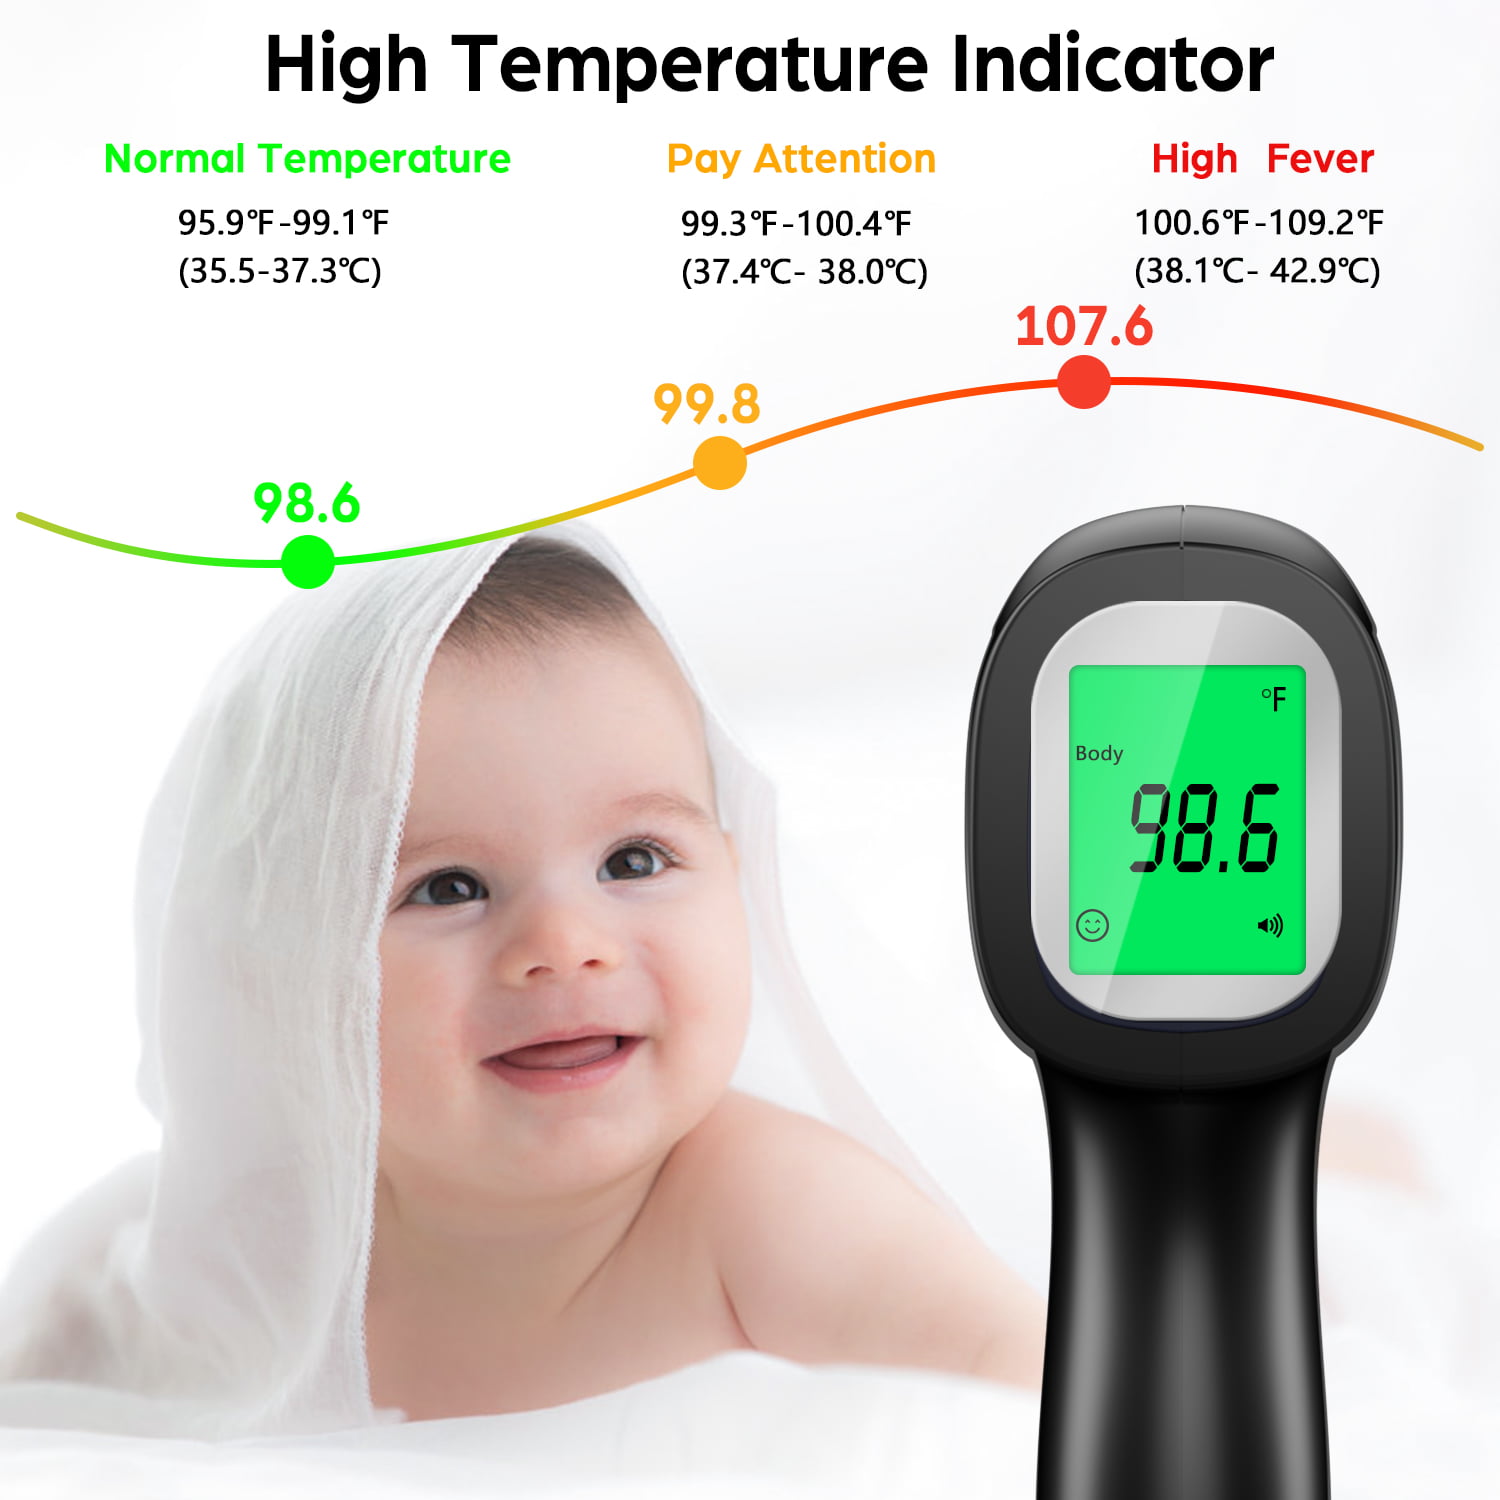 LPOW Non-Contact Infrared Thermometer with Fast Reading